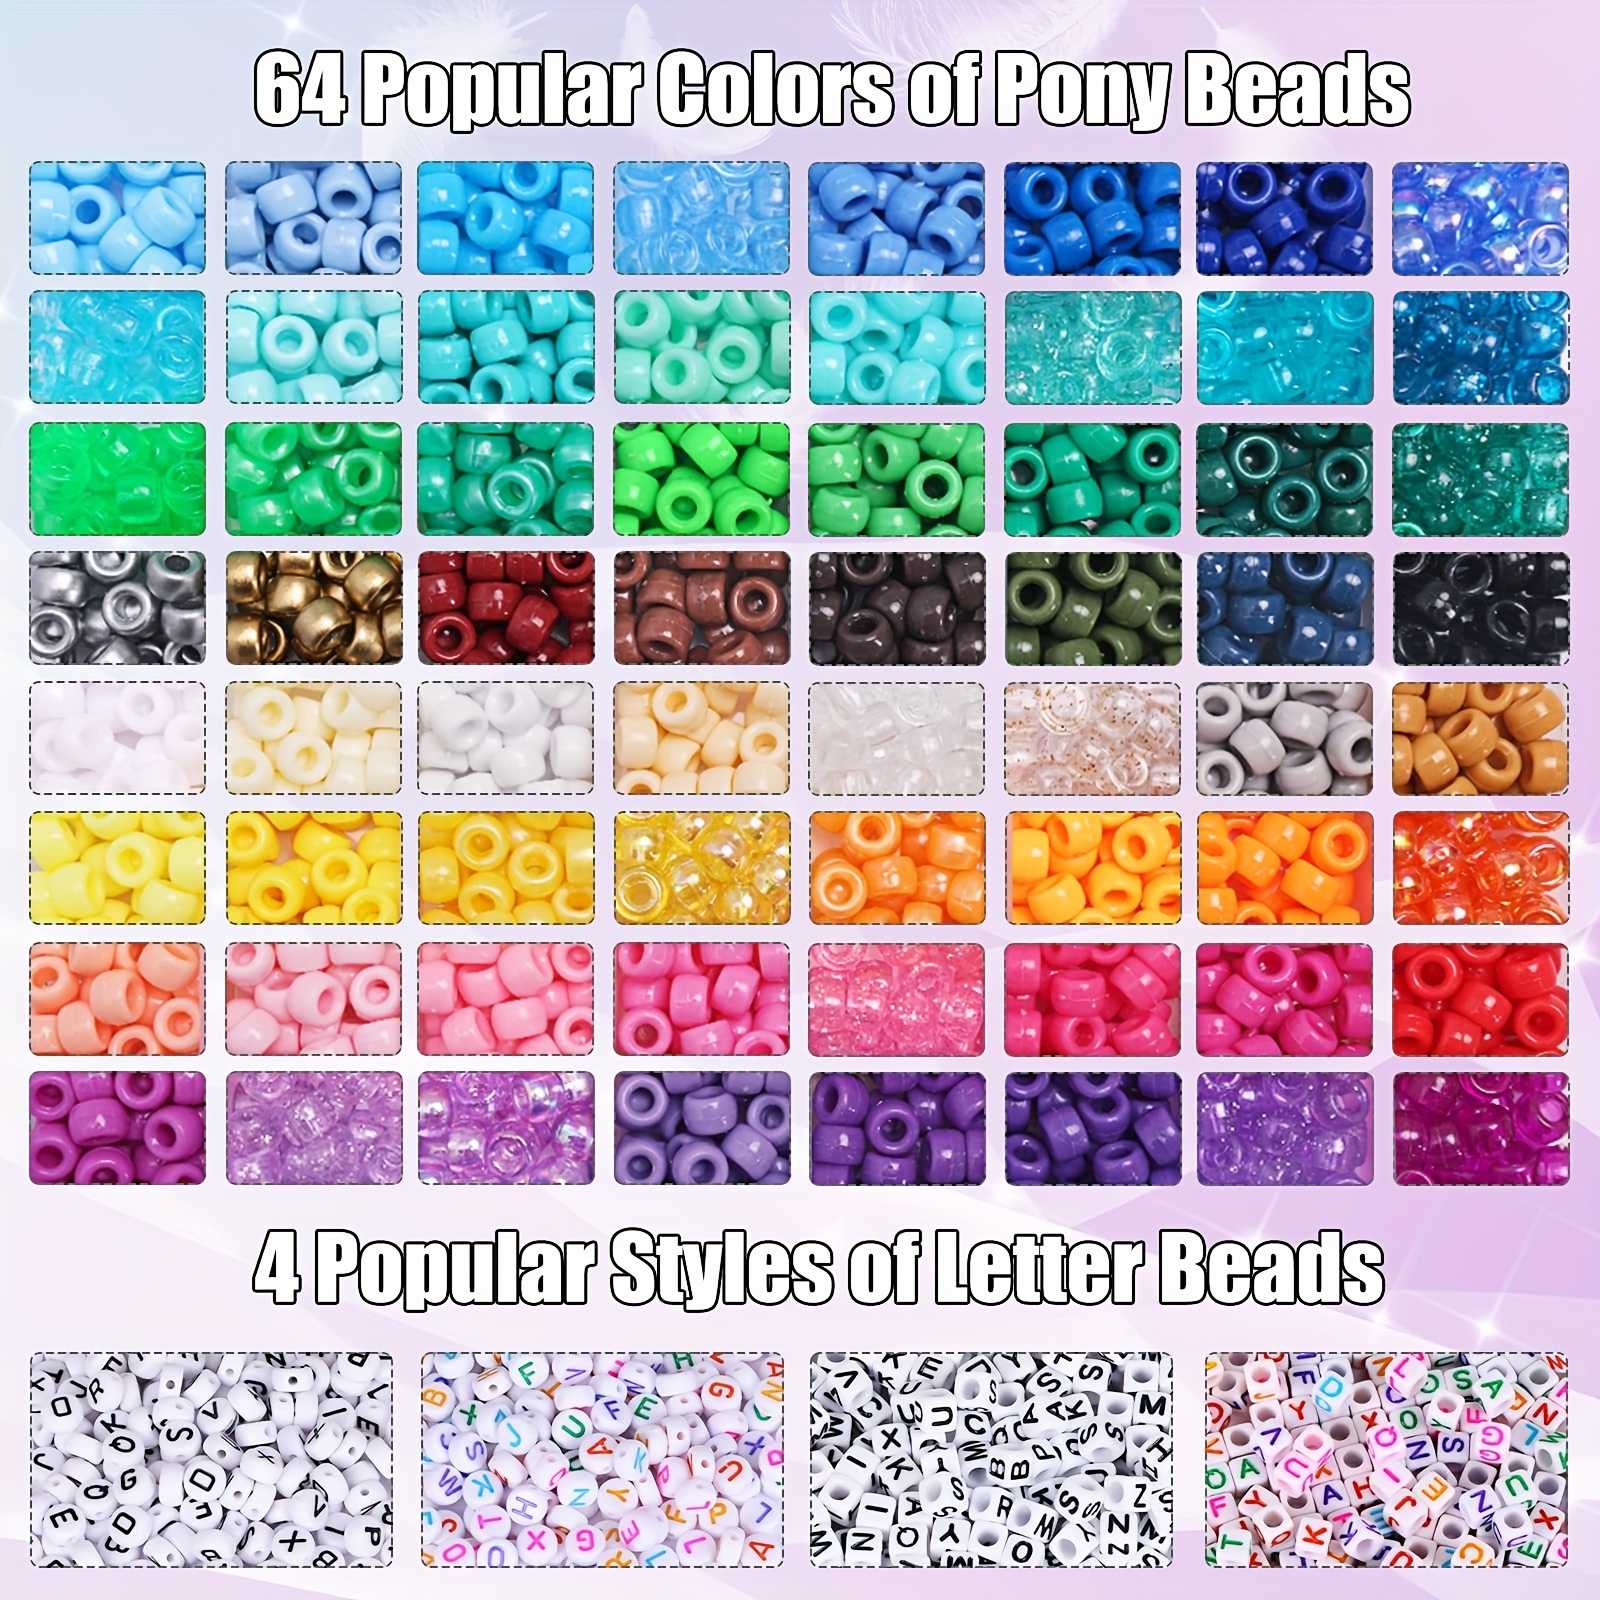 Baker Ross EF330 Alphabet Cube Beads - Pack of 450, Pony Bead Crafts for Kids Arts and Crafts and Jewelry Making